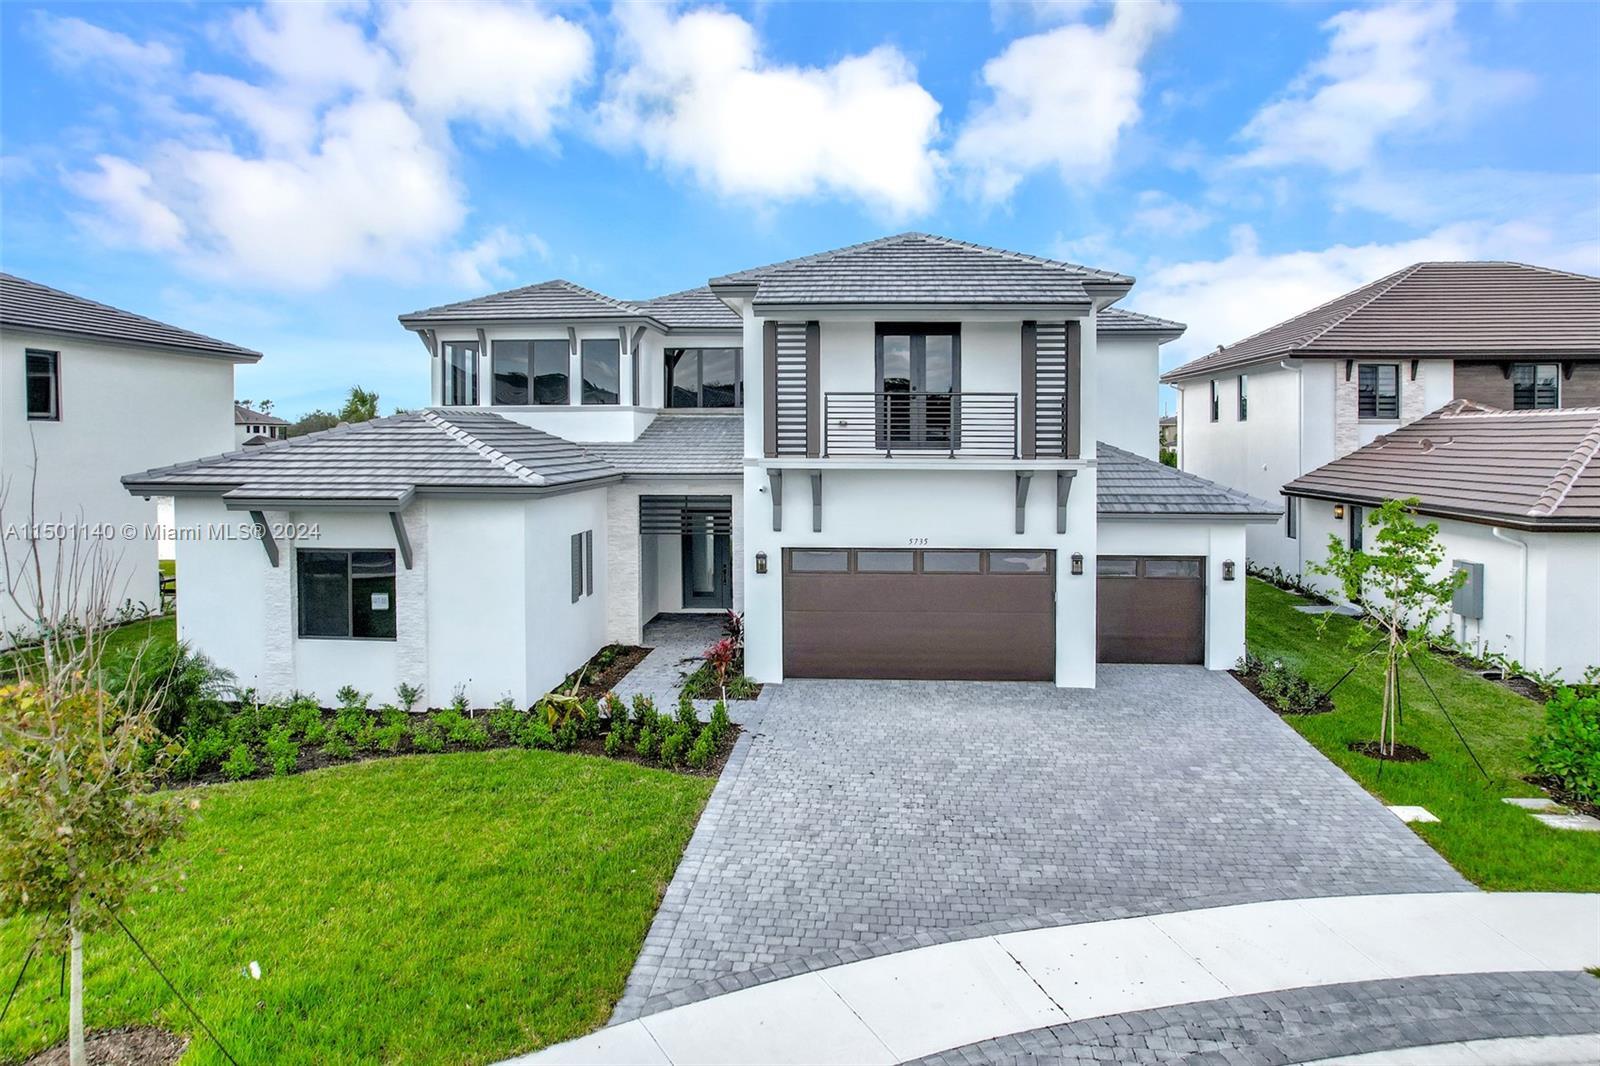 Photo of 5735 SW 104th Ter in Cooper City, FL